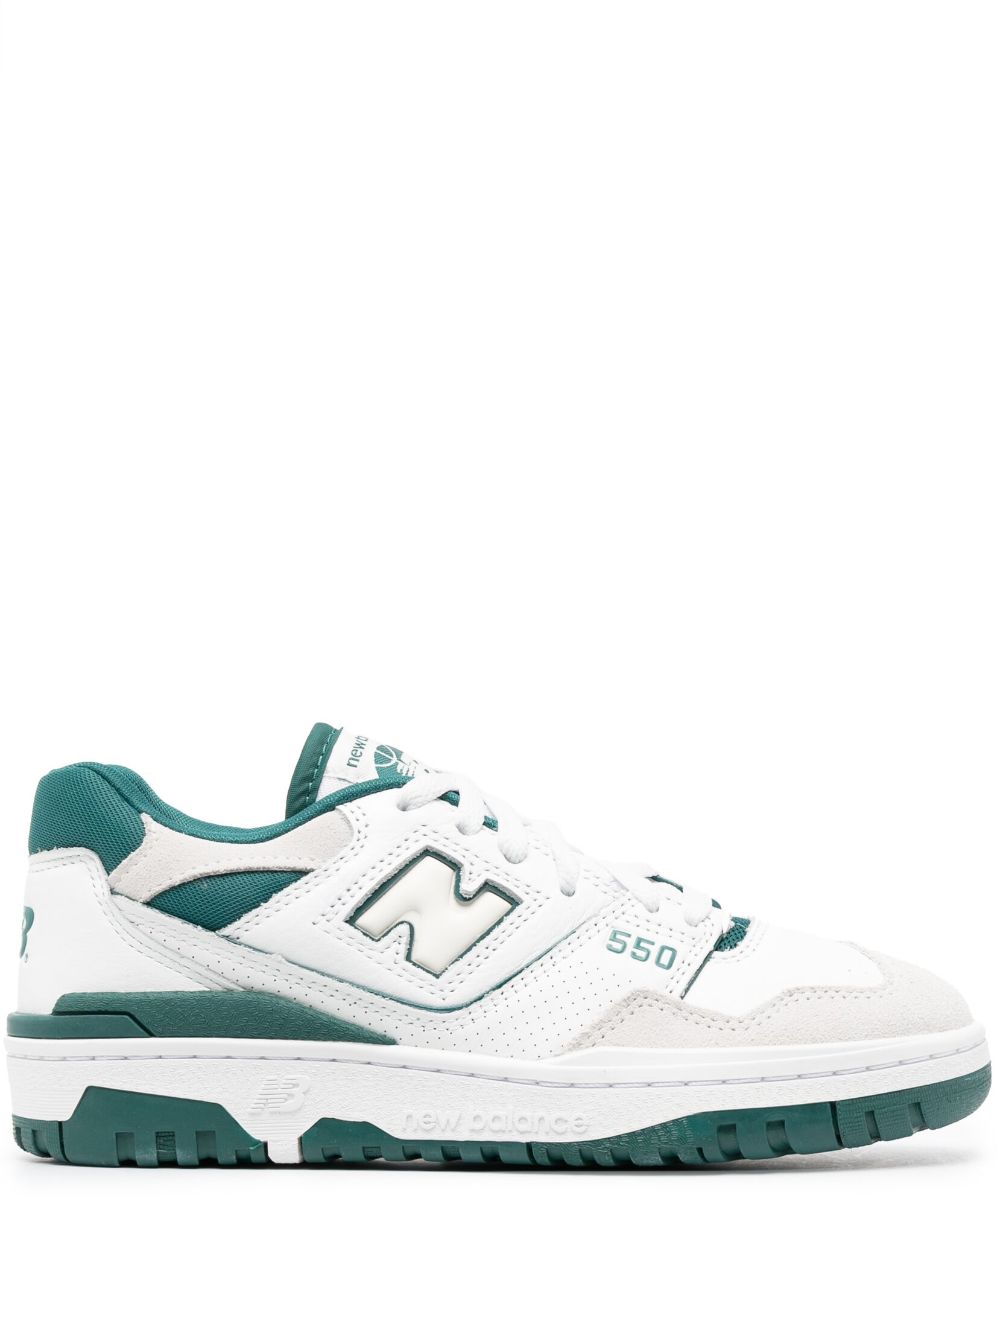 New Balance 550 low-top leather sneakers - White